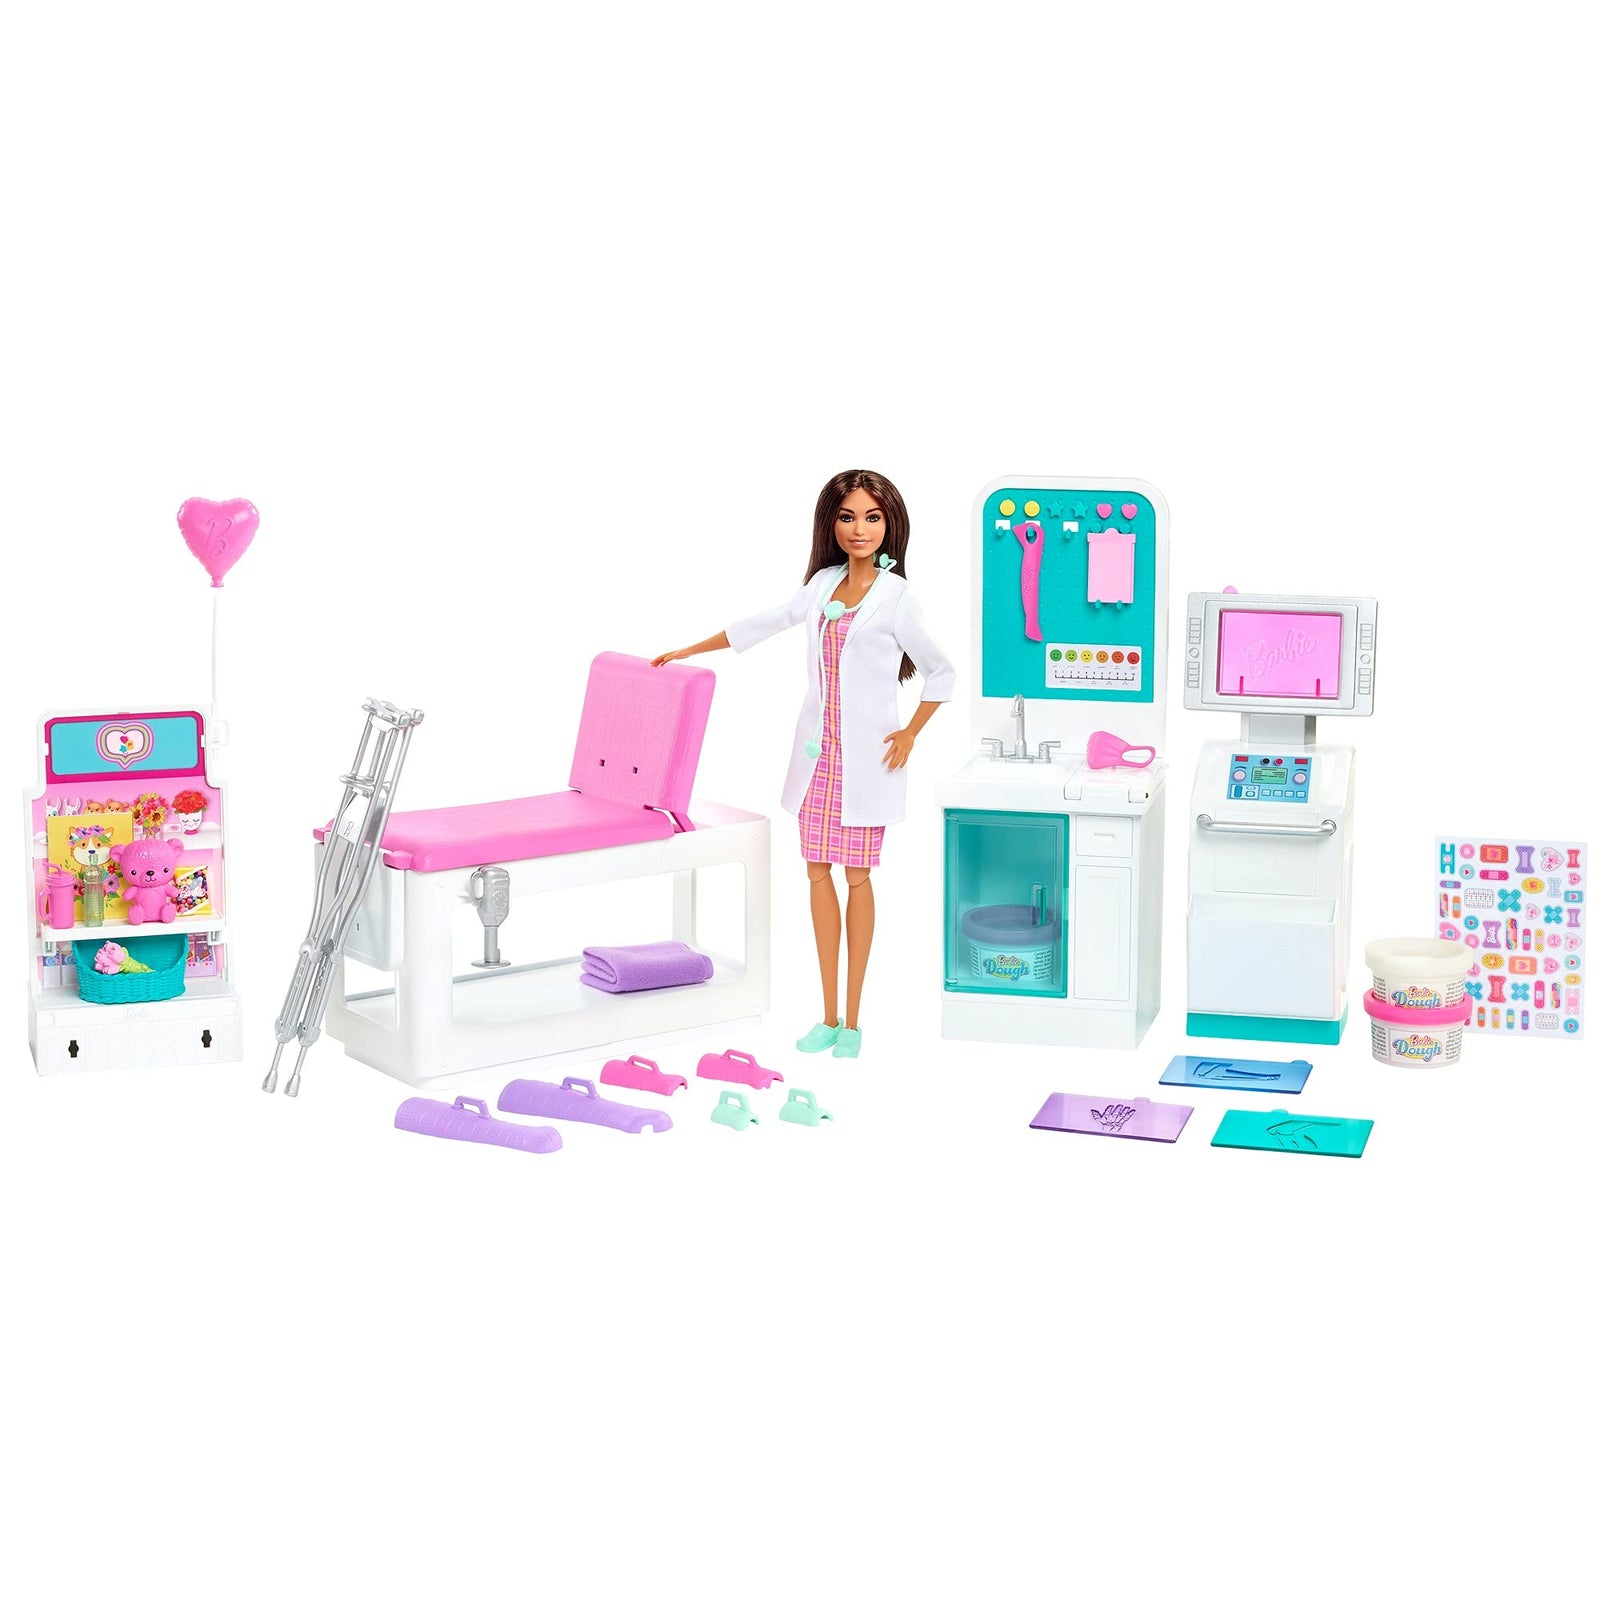 Barbie Fast Cast Clinic Playset, Brunette Doctor Doll (12-in), 30+ Play Pieces, 4 Play Areas, Cast & Bandage Making, Medical & X-ray Stations, Exam Table, Gift Shop & More, Great Toy Gift